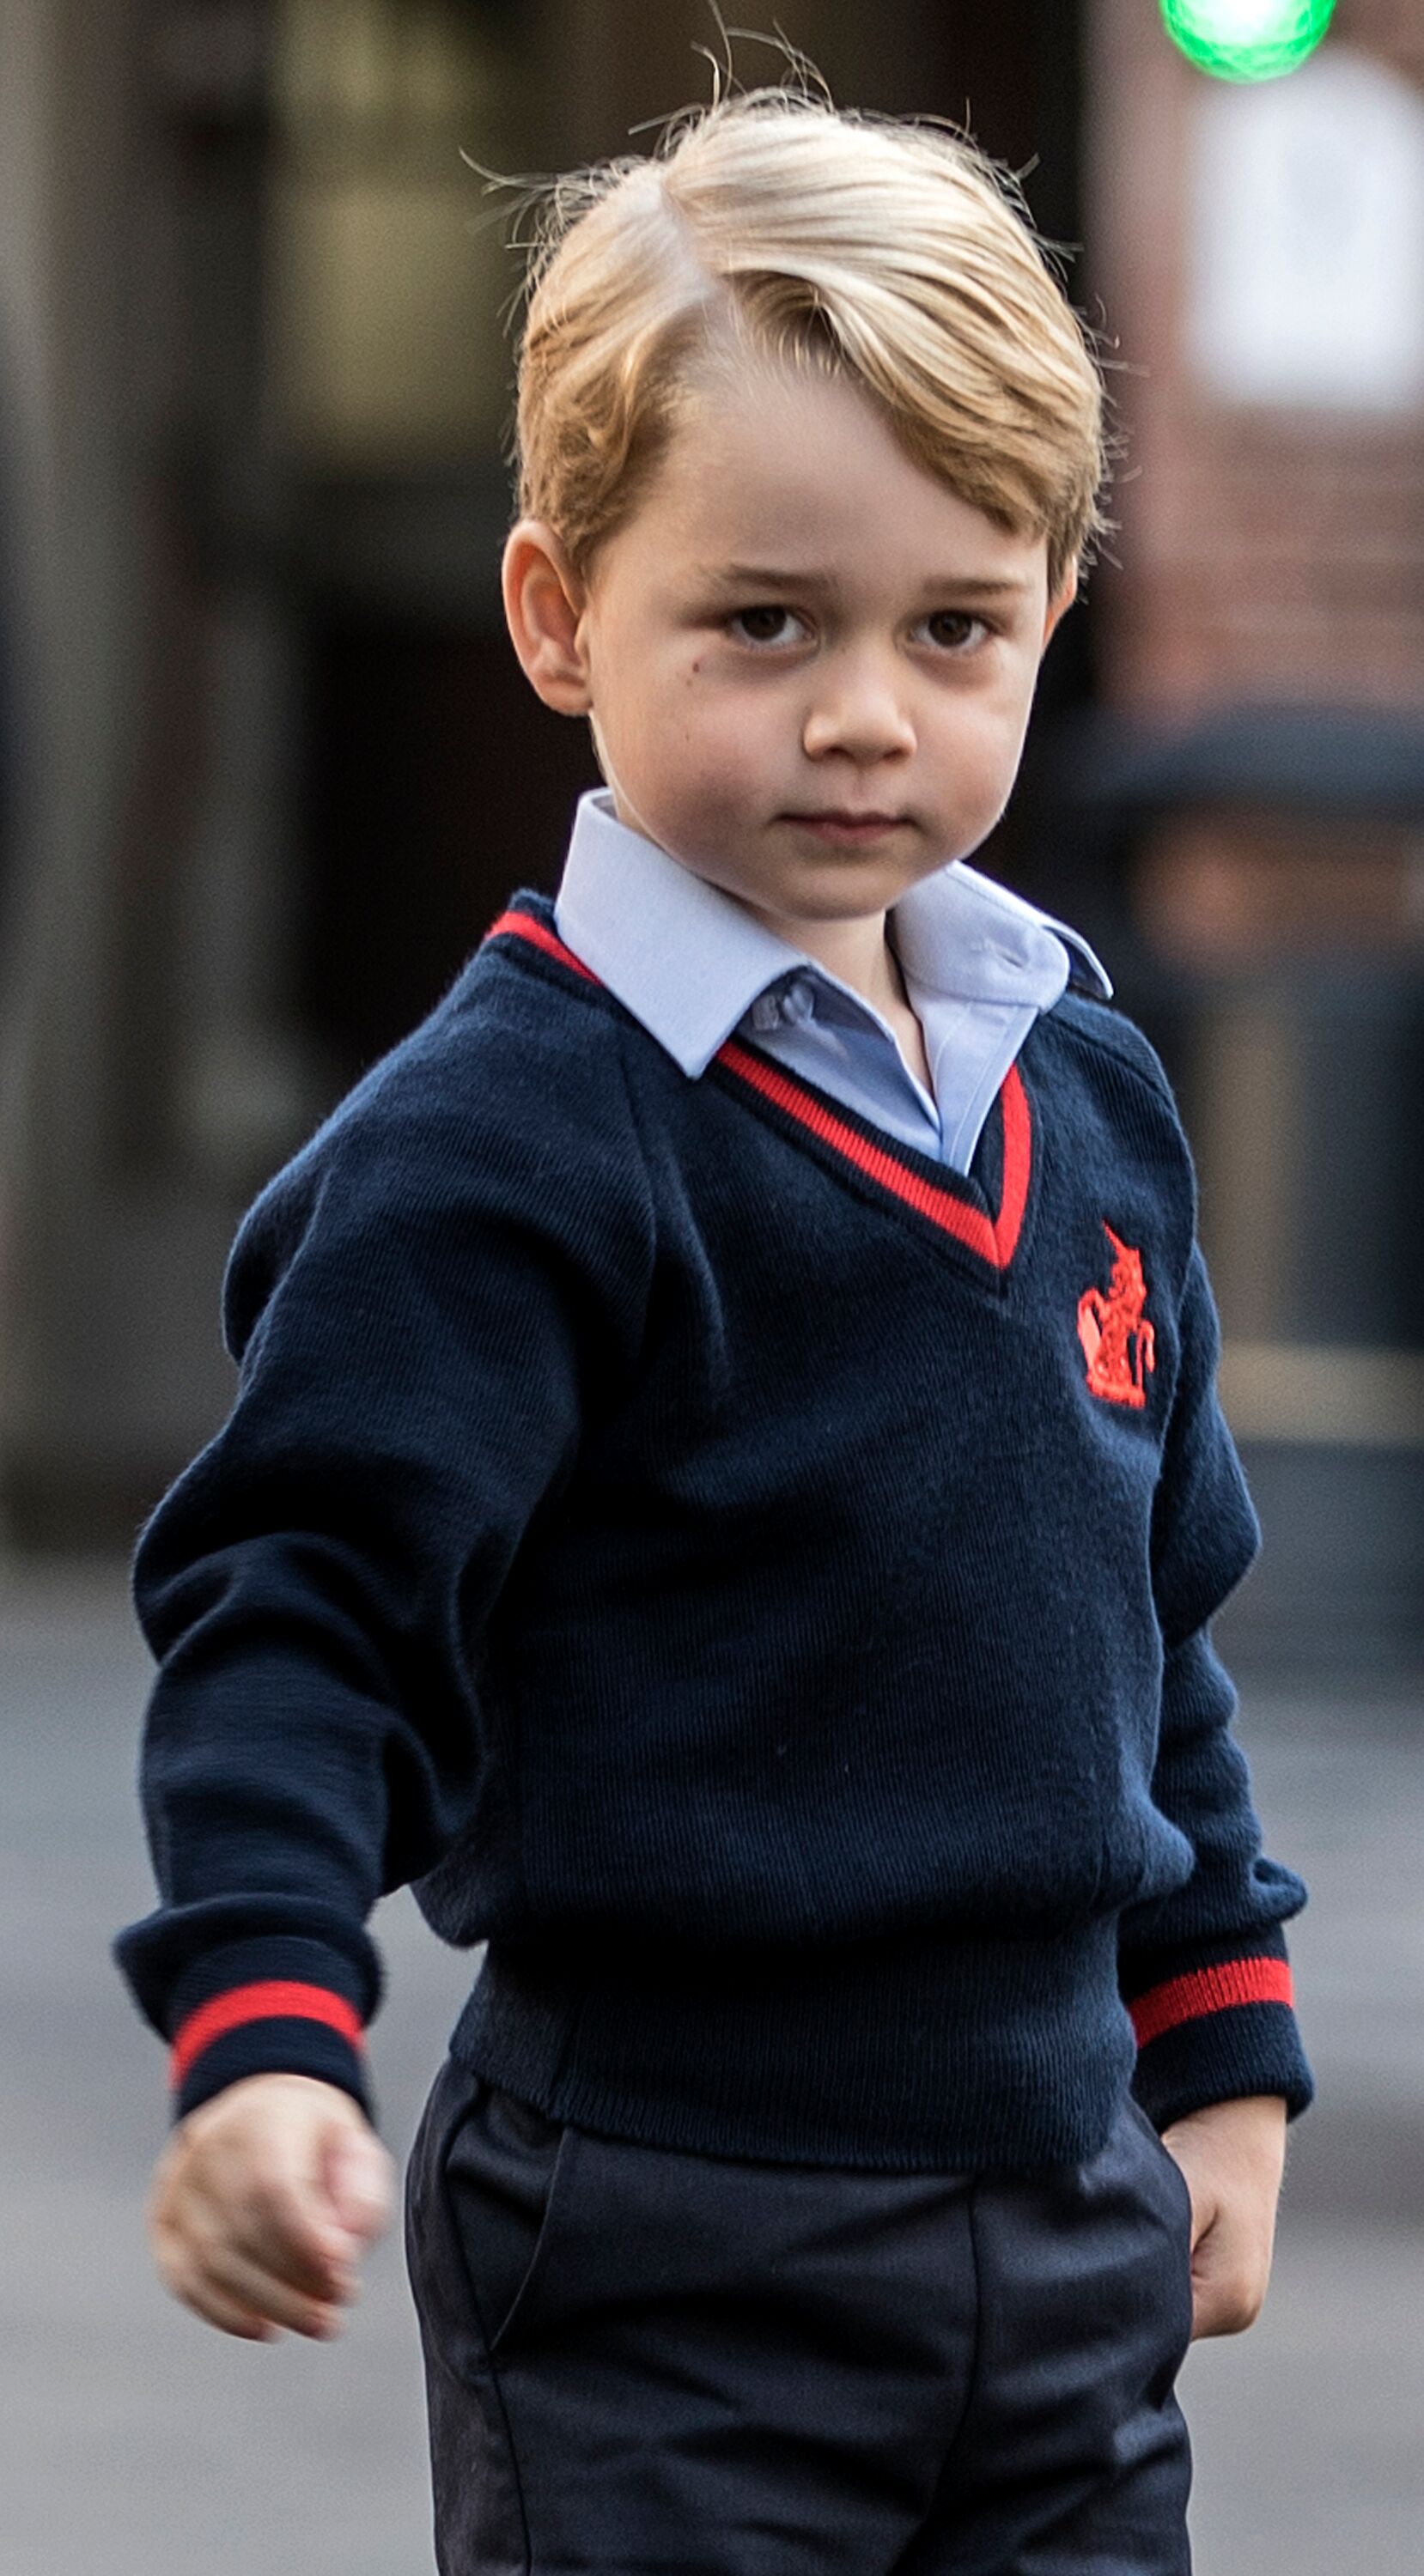 Prince George arrives for his first day of school. | Source: Getty Images